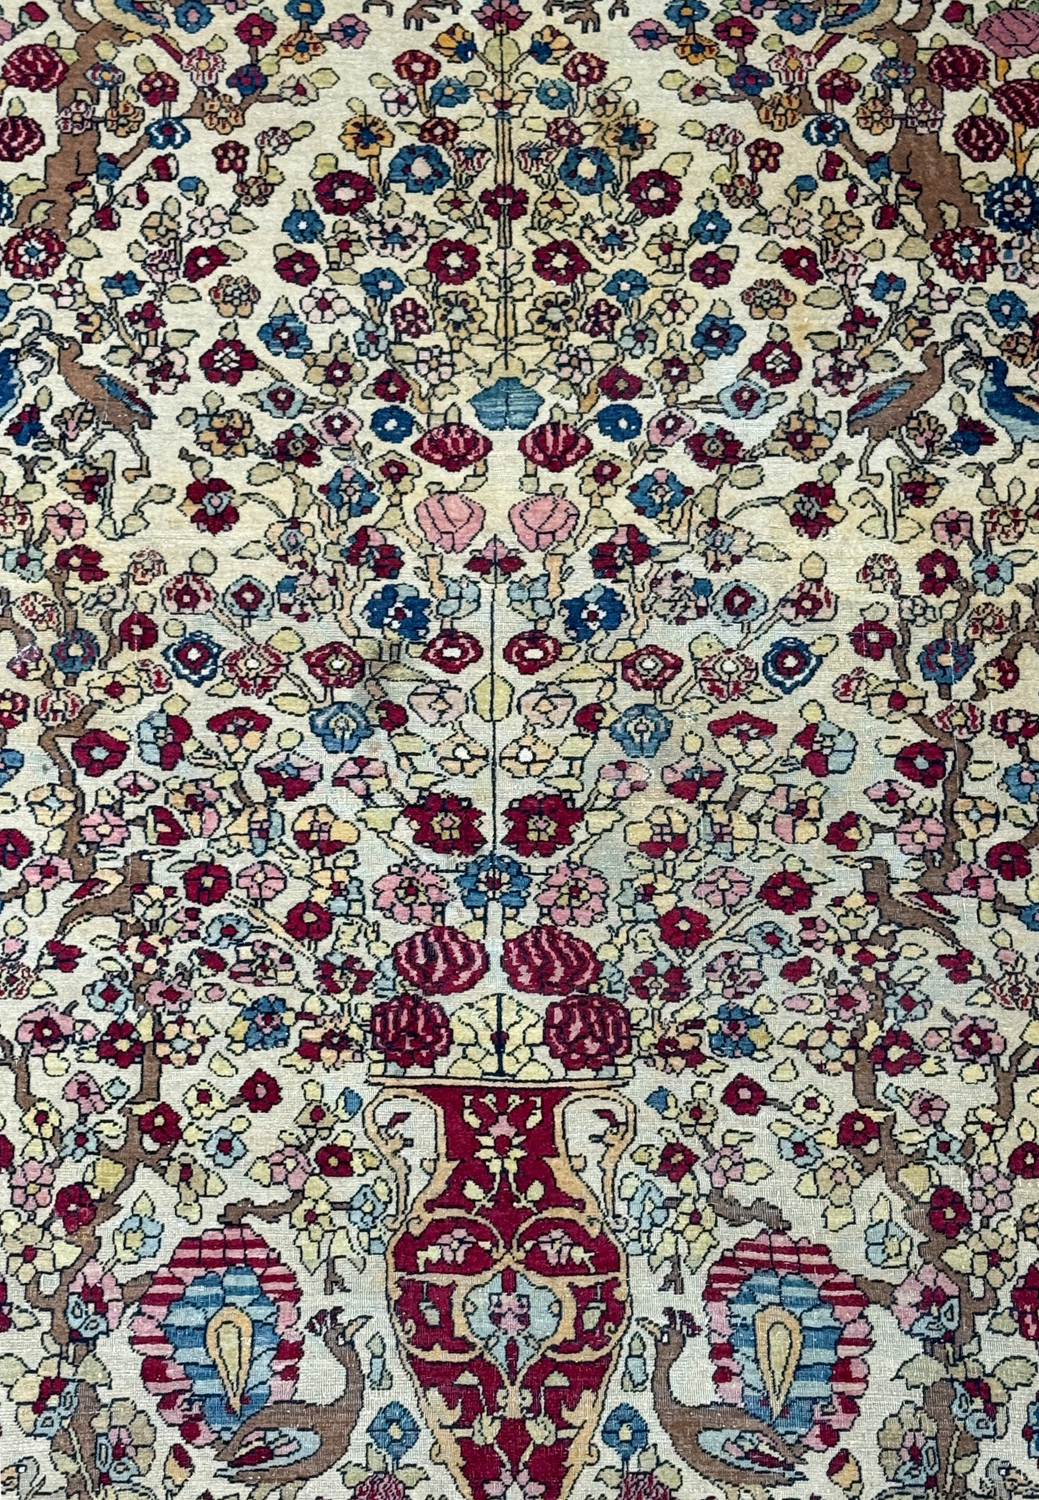 A close-up of the central part of the rug, highlighting the detailed vases and tree of life motif amidst the floral patterns.